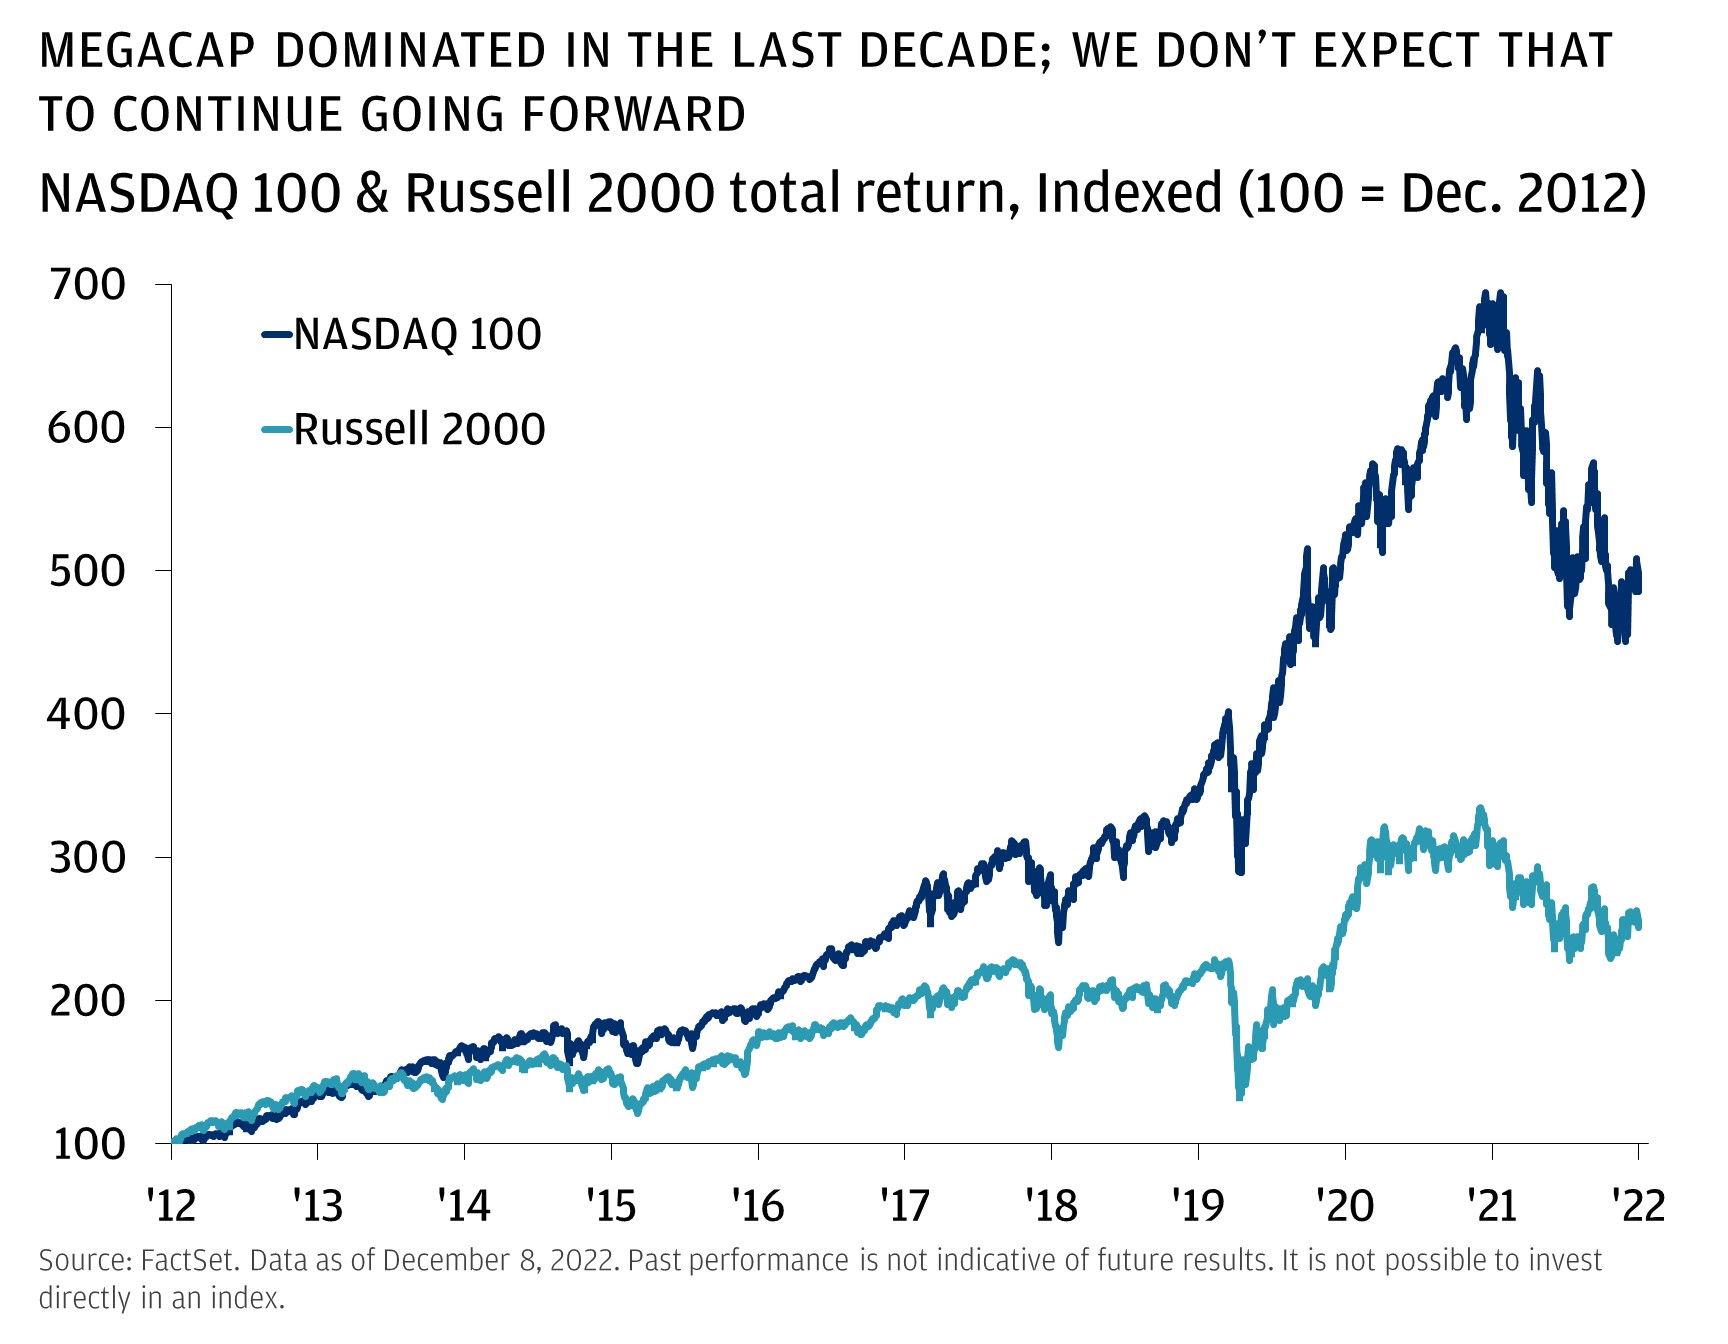 This graph shows the NASDAQ 100 and Russell 2000 total return, indexed (100 = December 2012), from December 8, 2012, to December 8, 2022.